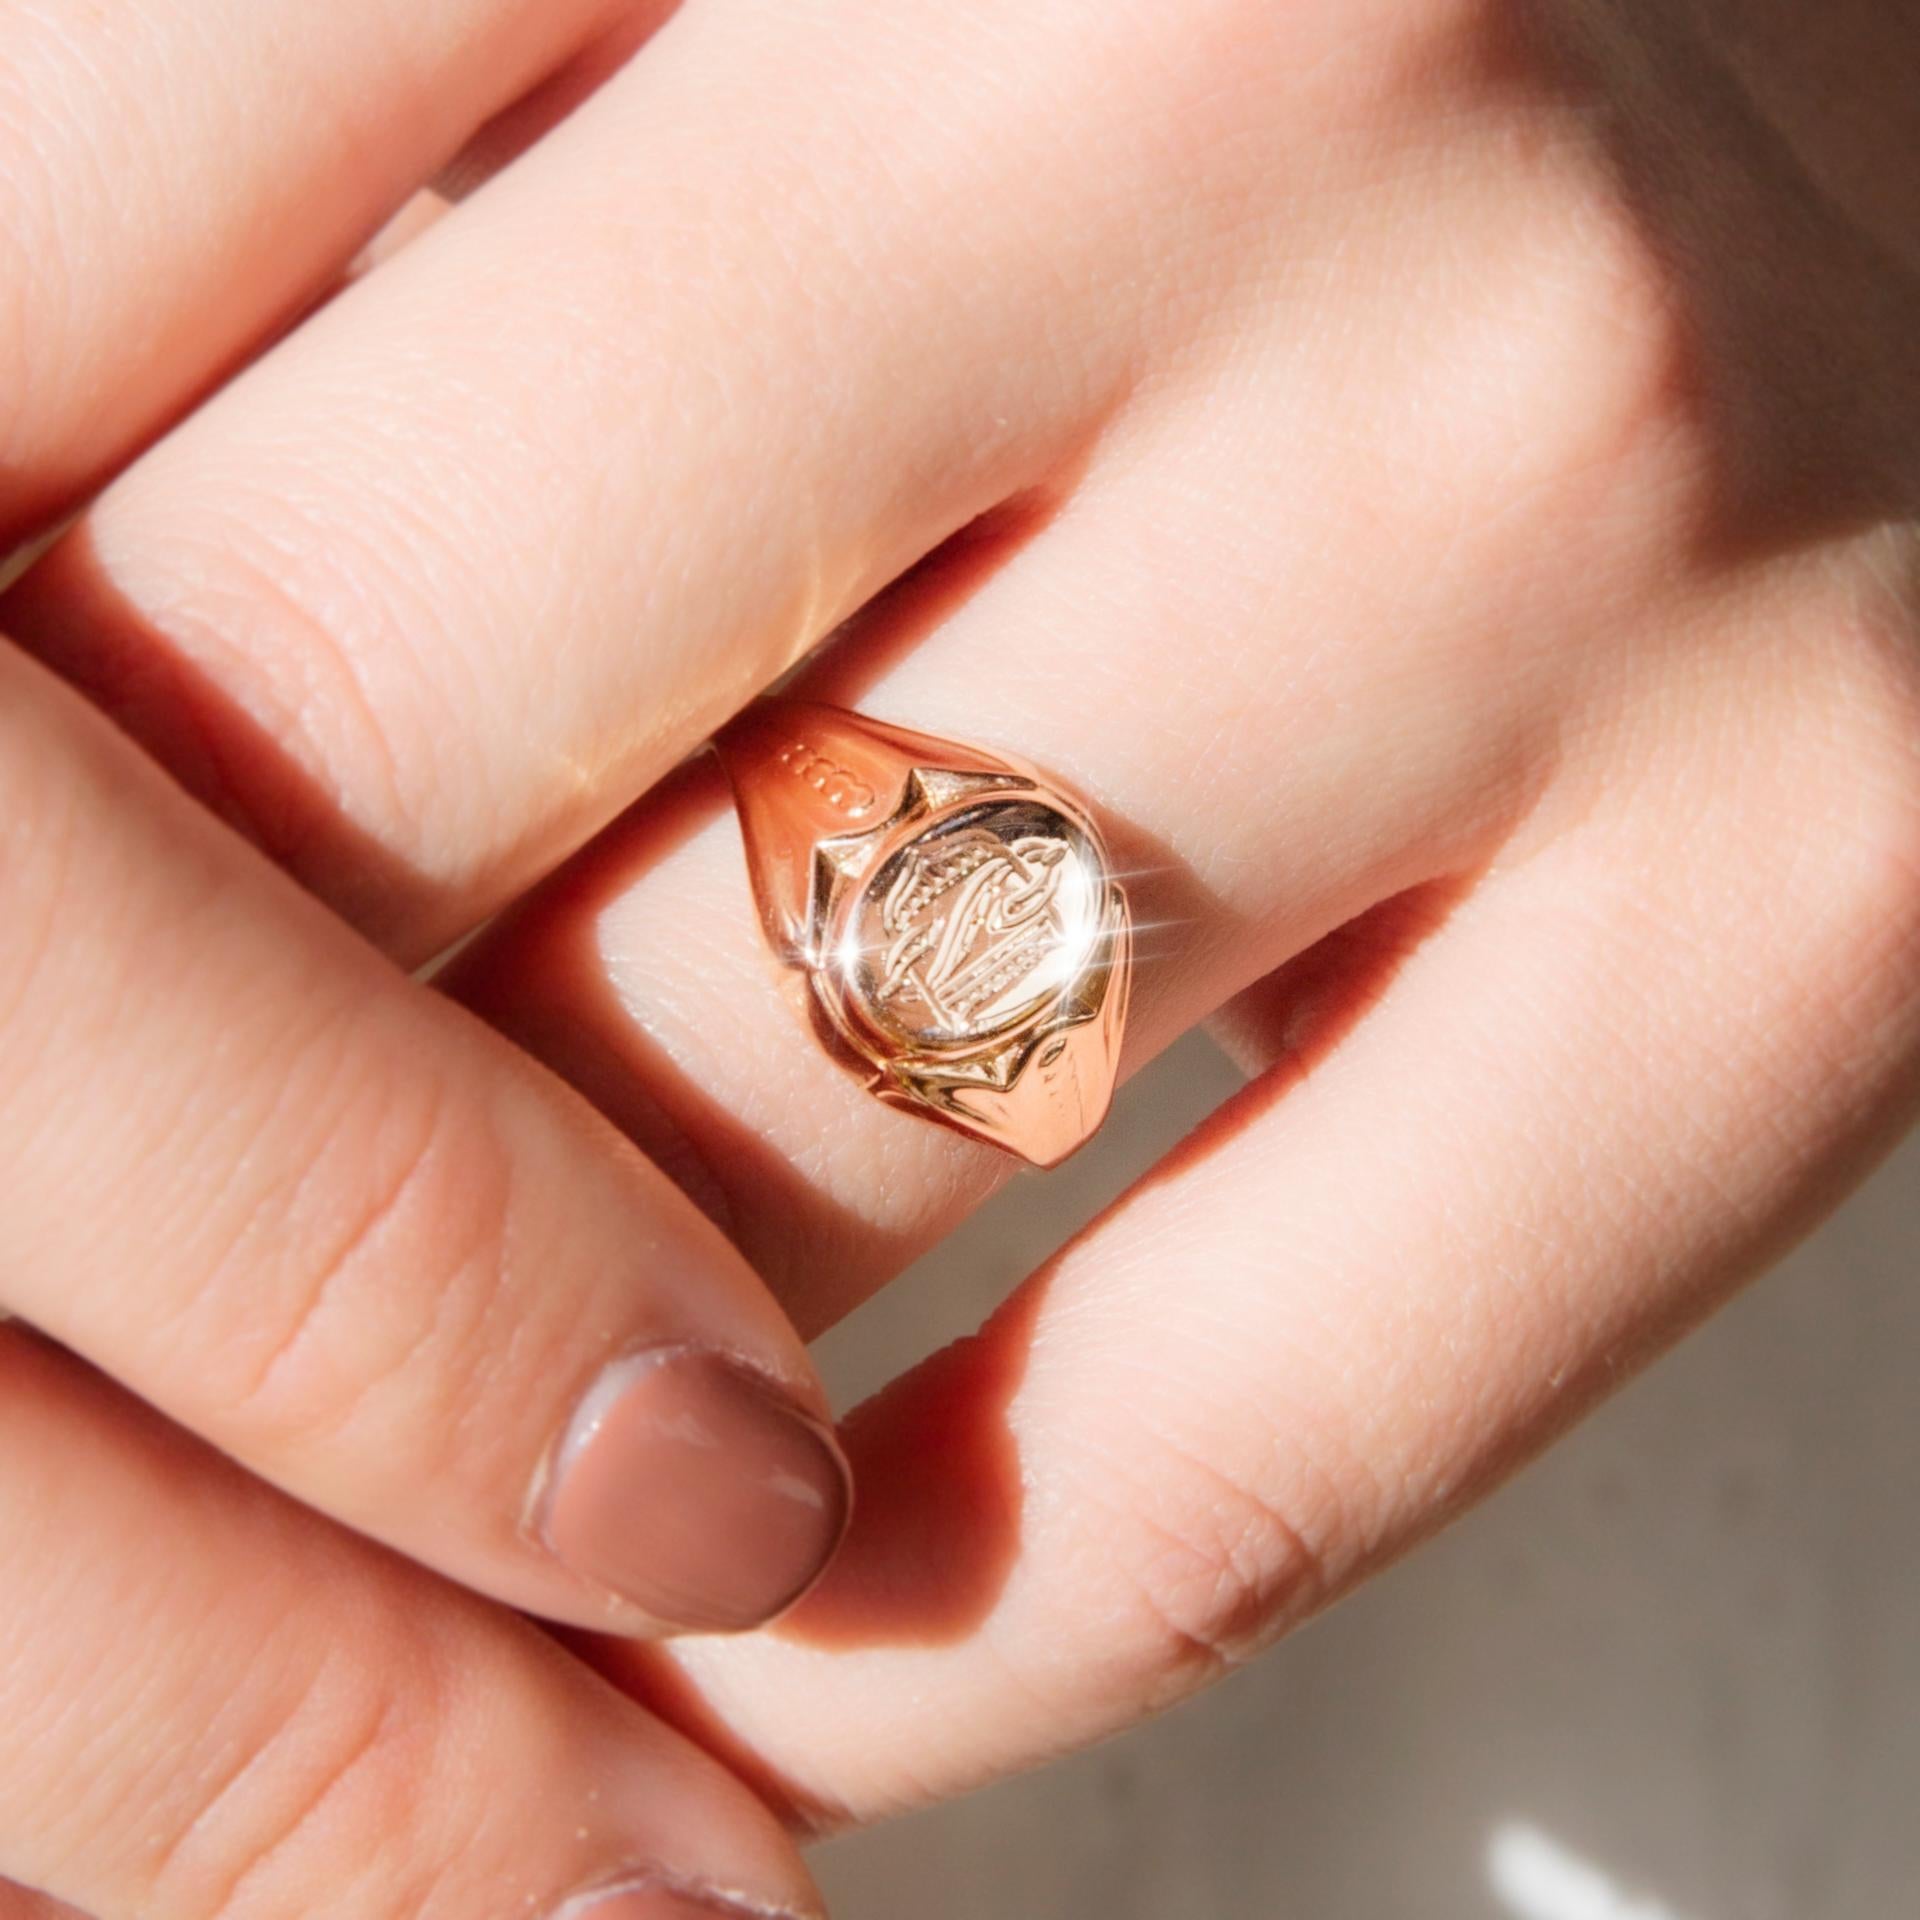 Forged in 14 carat rose gold, this darling signet ring features pleated and patterned shoulders widening into a flat oval top with the intricately engraved letters 